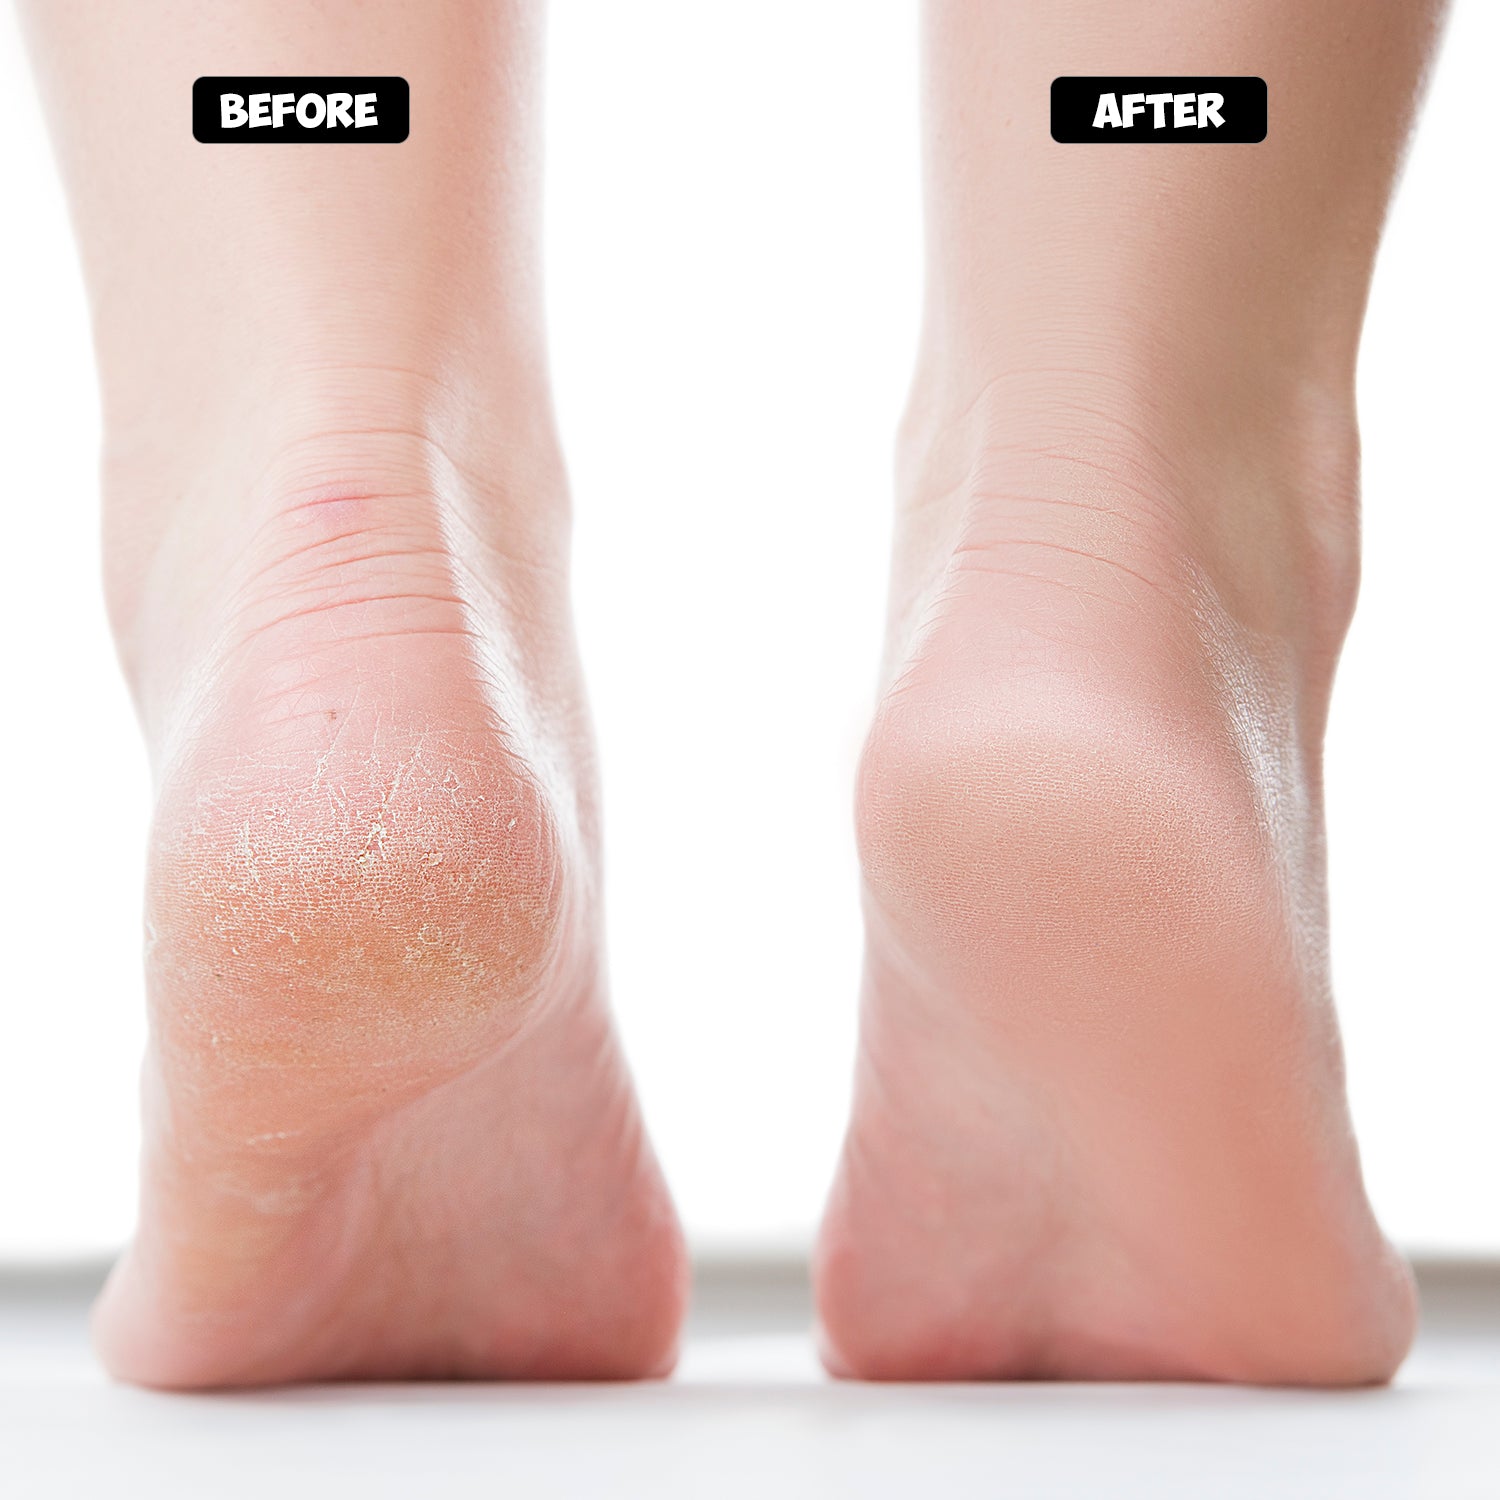 Treating and Repairing Dry Feet and Heels